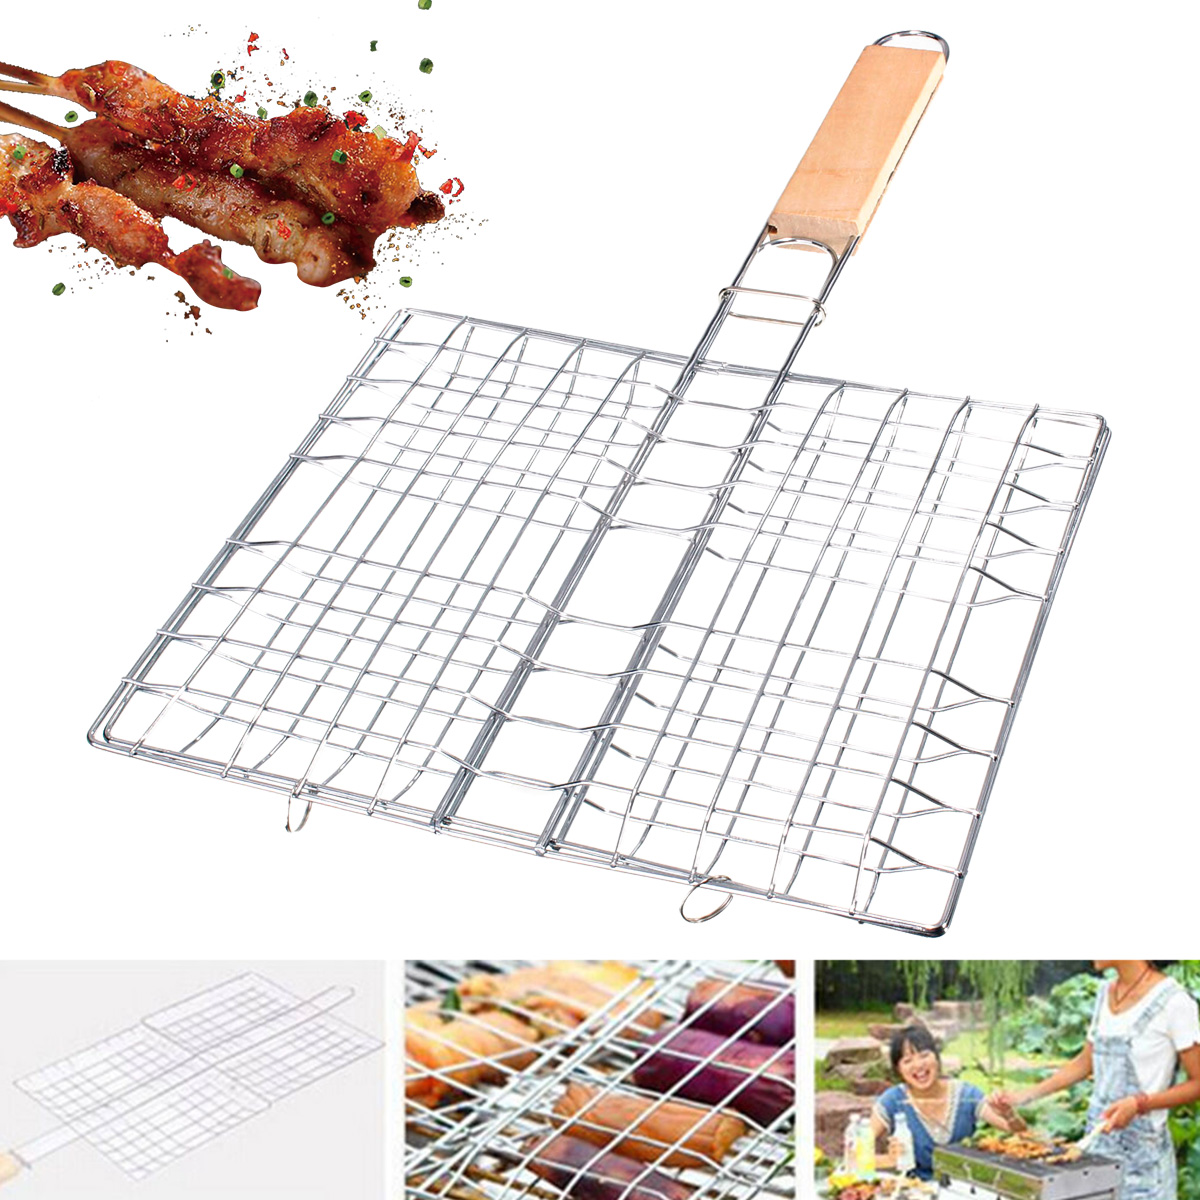 

Portable Folding Stainless Steel BBQ Grill Basket Outdoor Camping BBQ Hamburg Vegetables Fishs Cooking Net